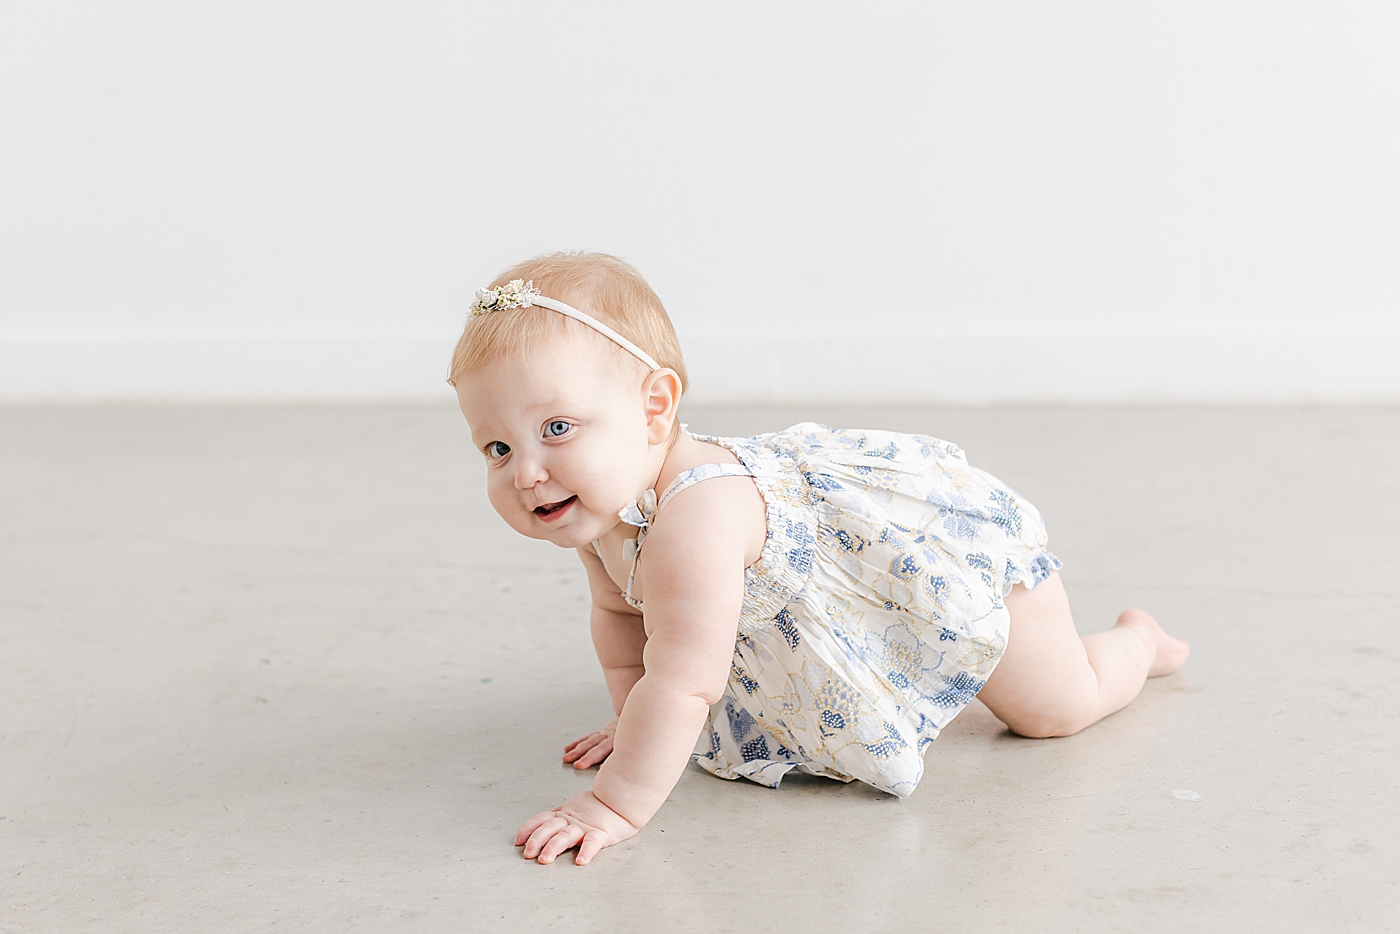 Baby girl in a cream and blue dress crawling | Sana Ahmed Photography